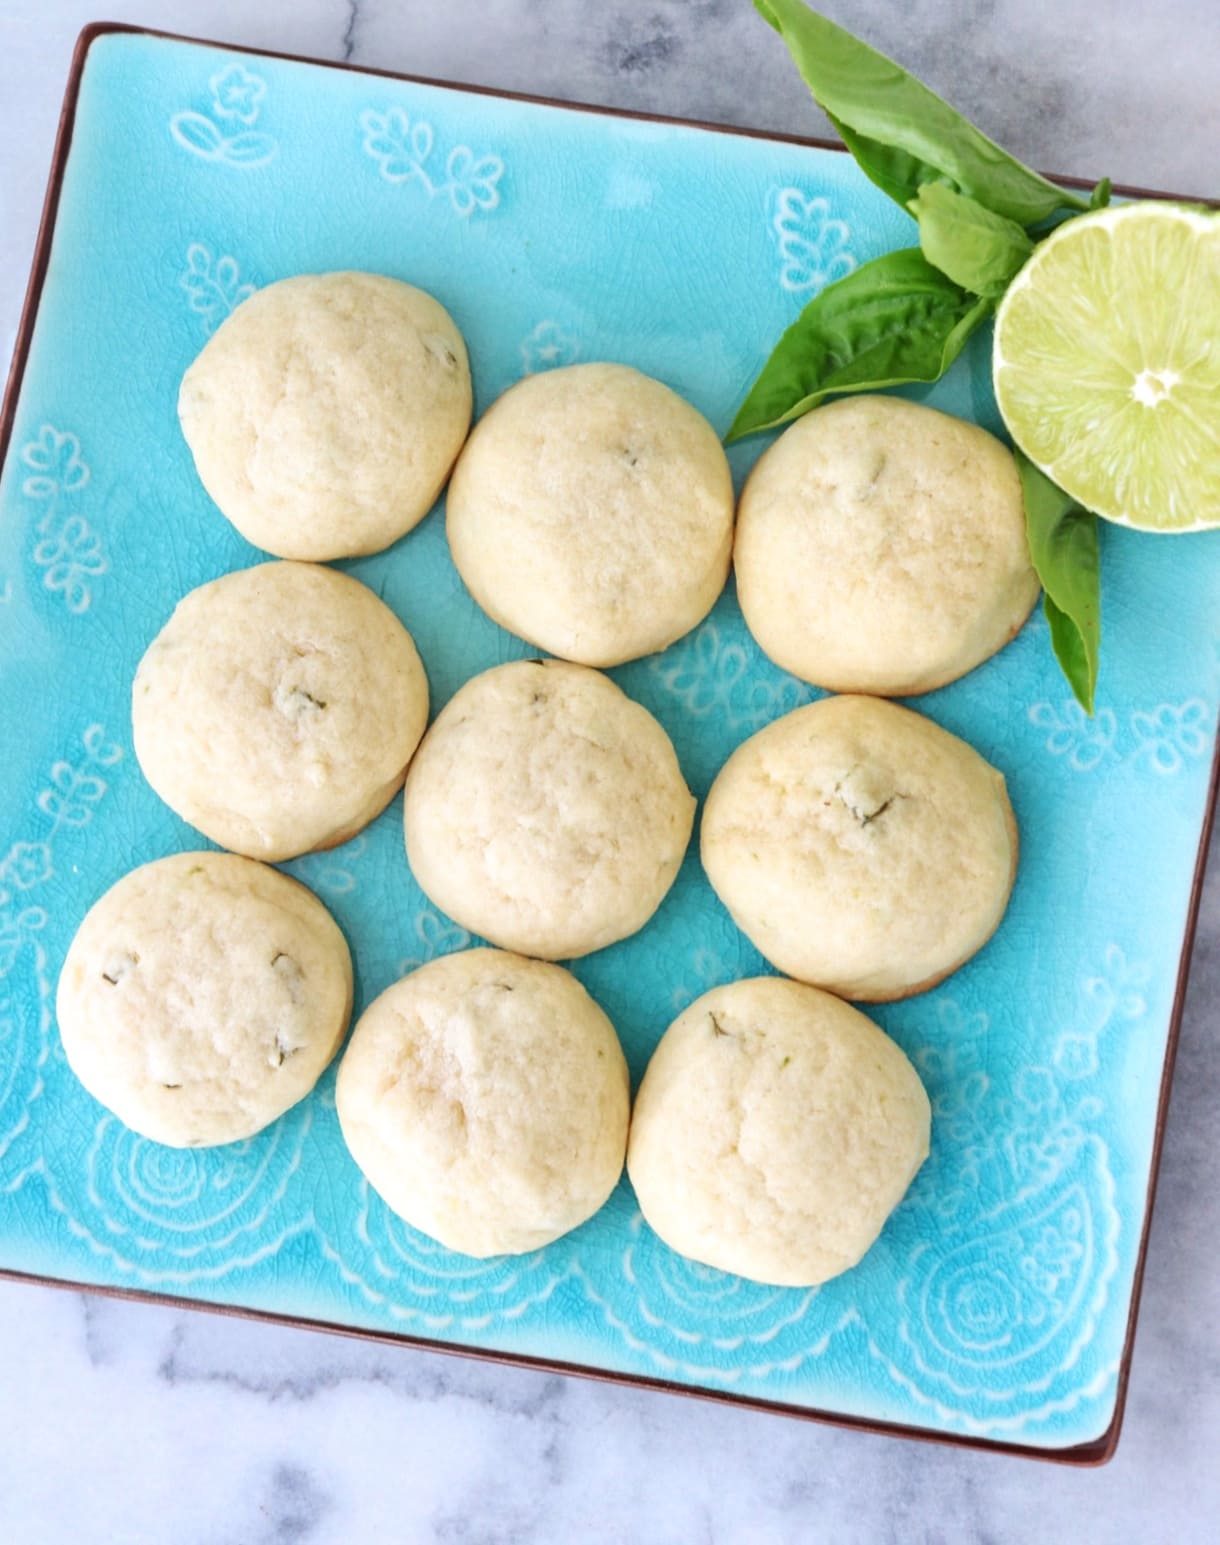 Lime Basil Cookies | The Nutrition Adventure